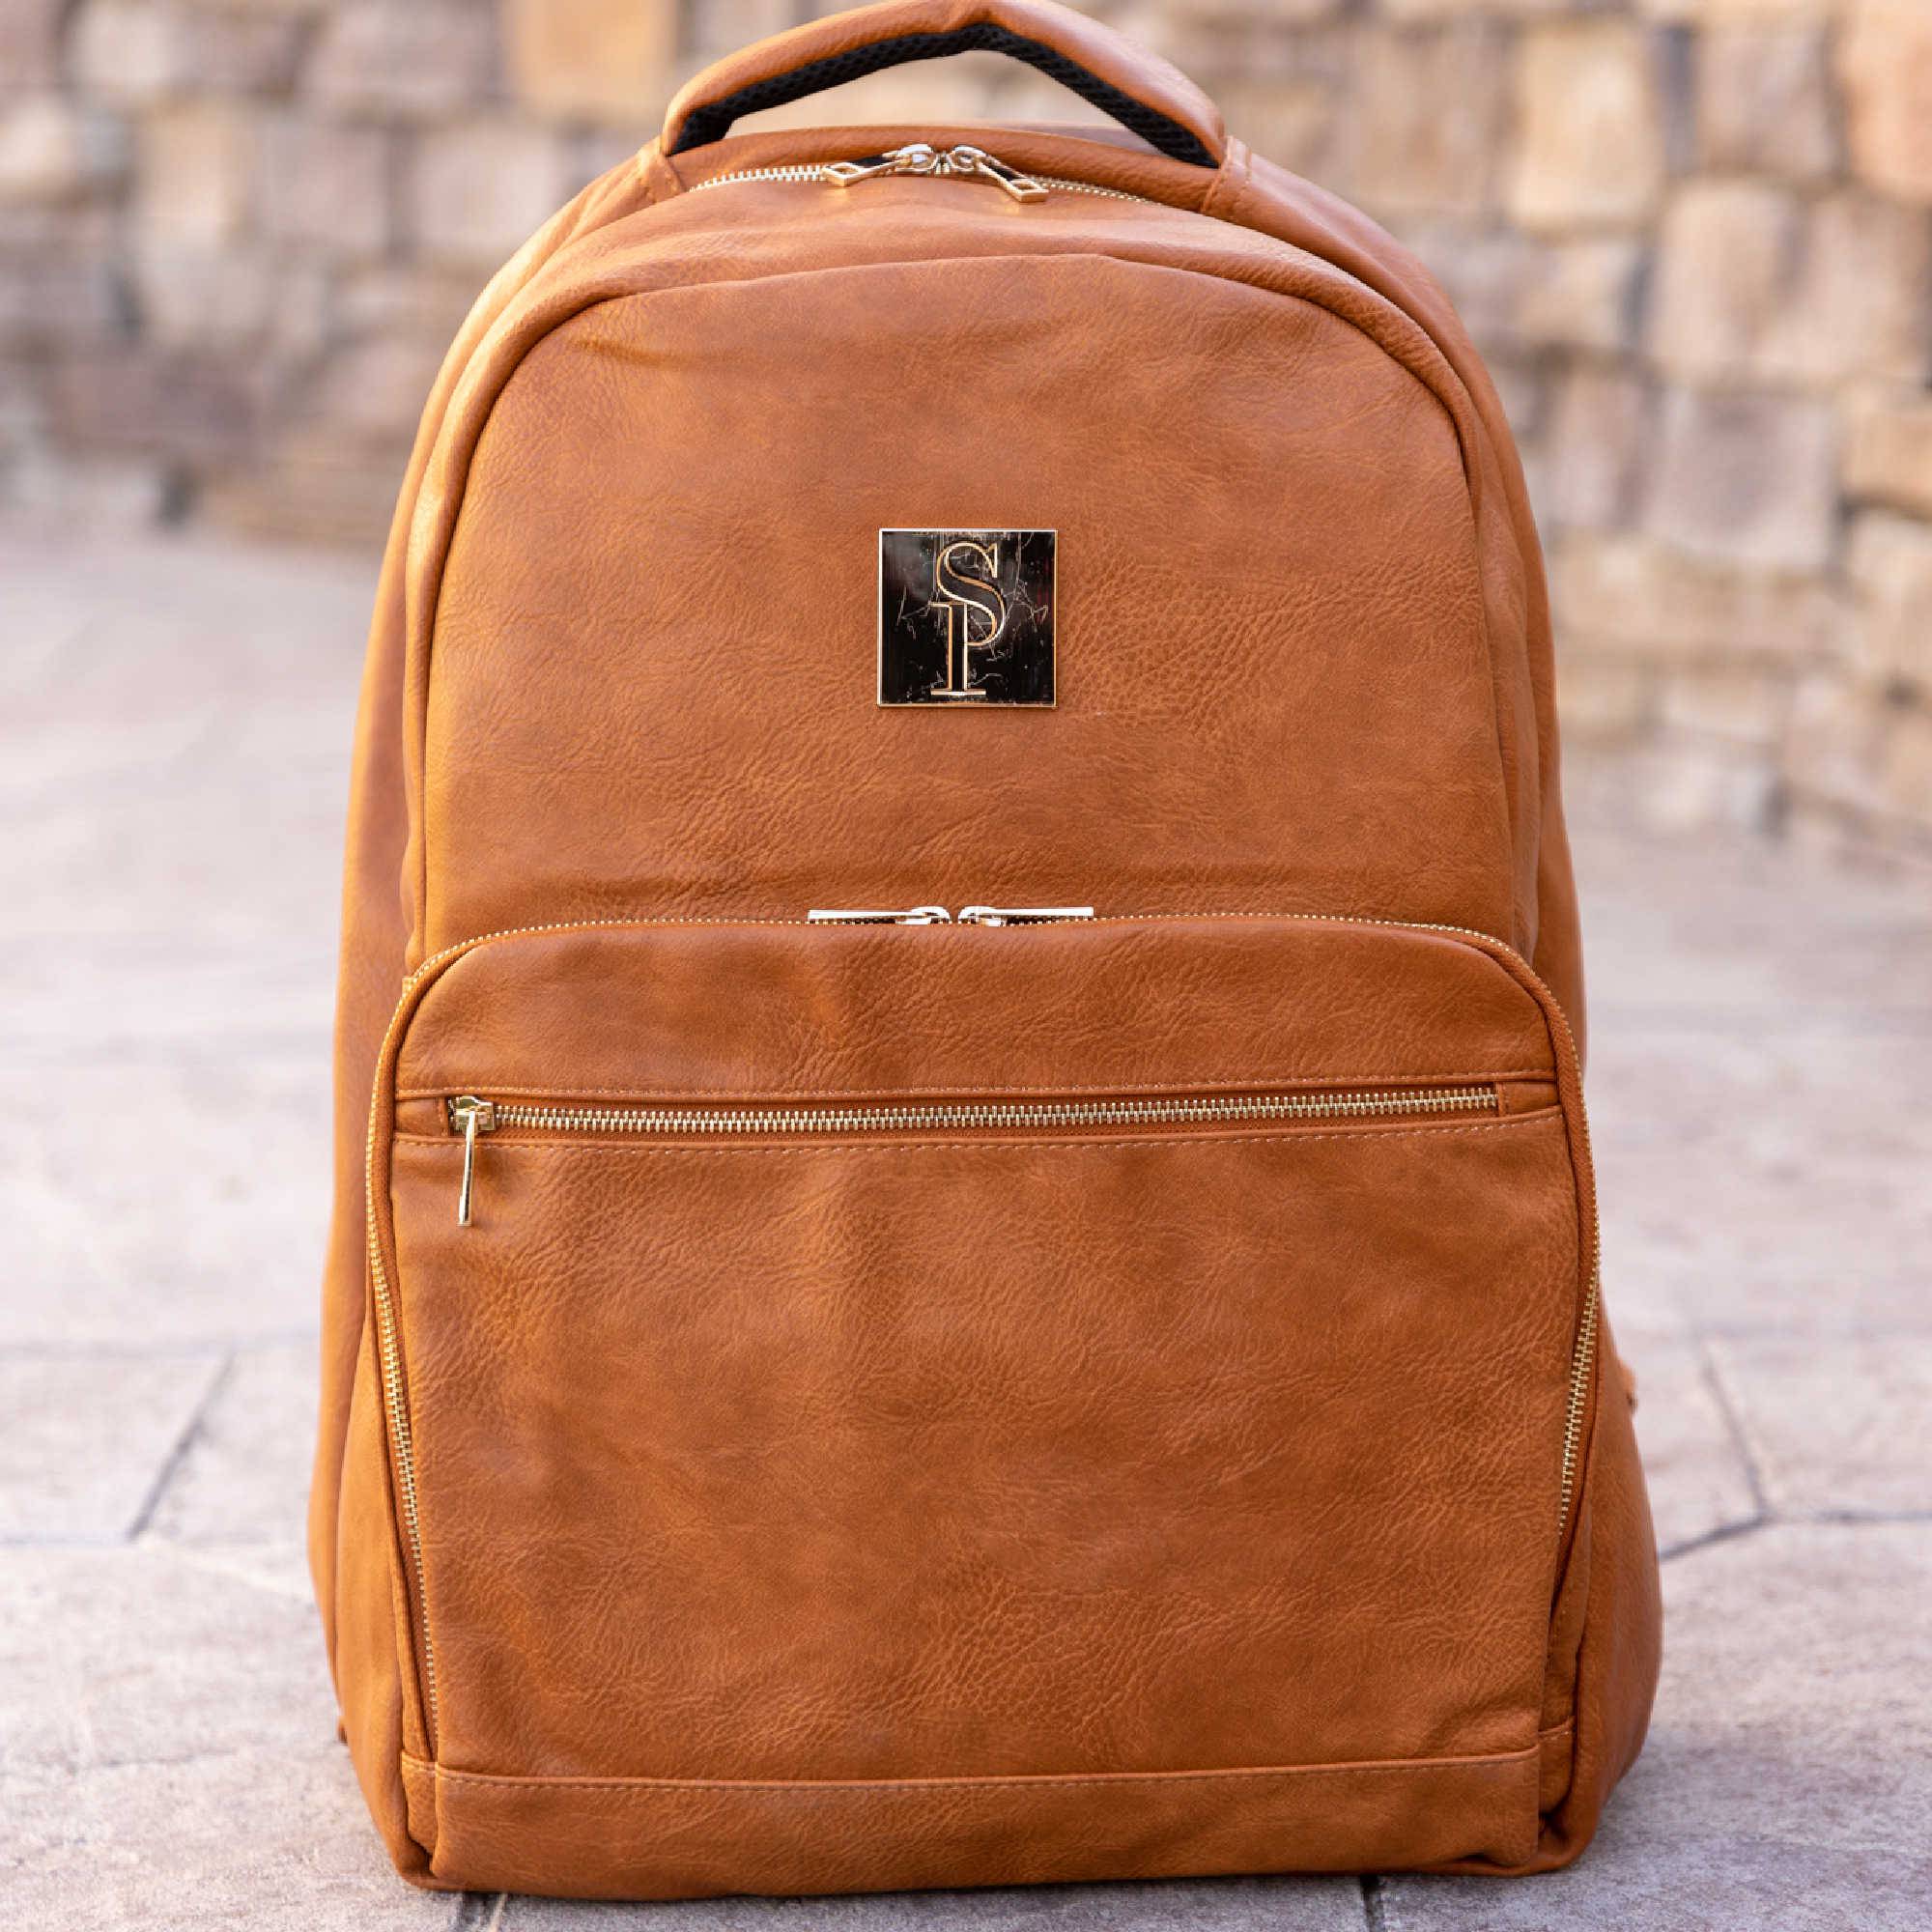 Brown Tumbled Leather Daily Commuter Bag - Sole Premise